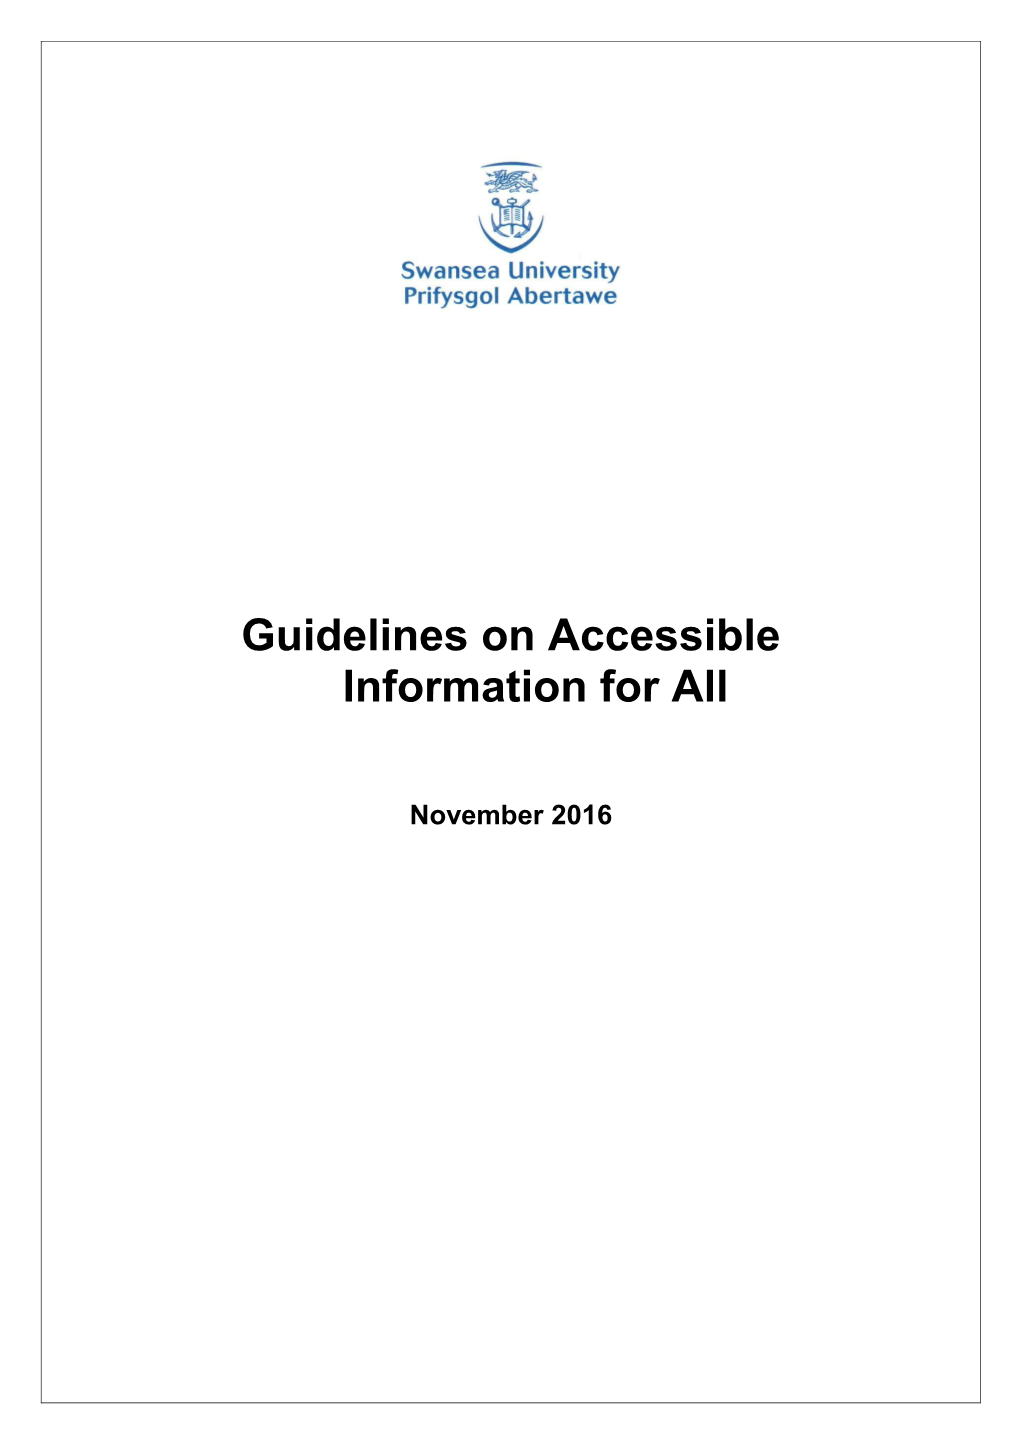 General Guidelines on Accessible Information for All